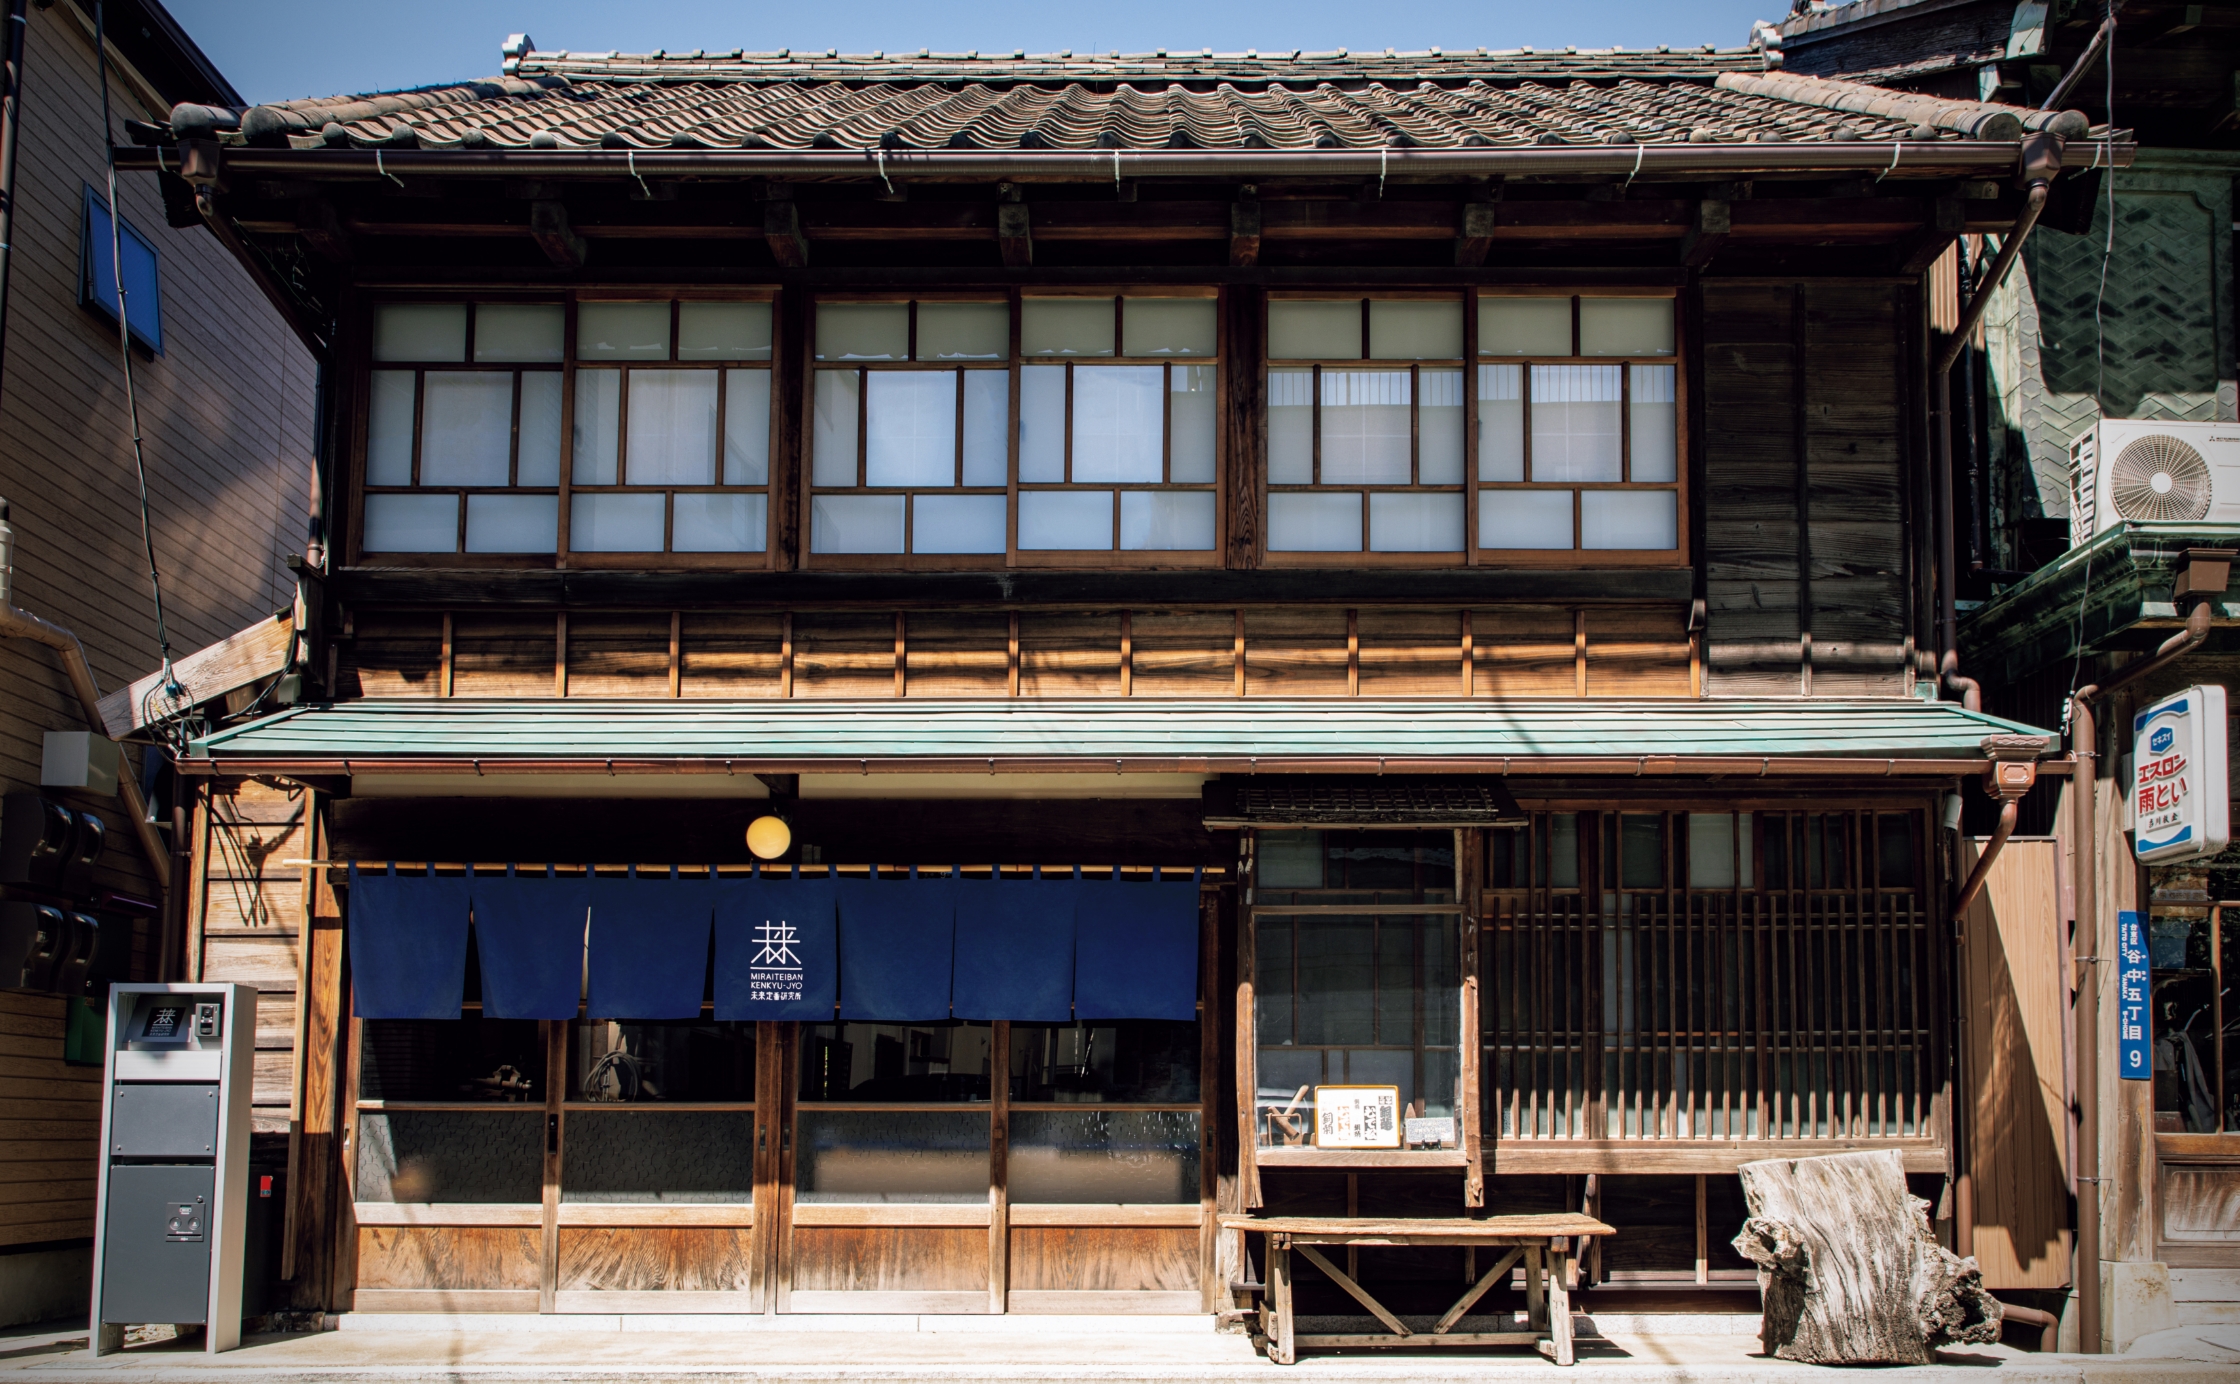 About Our Yanaka Office Location